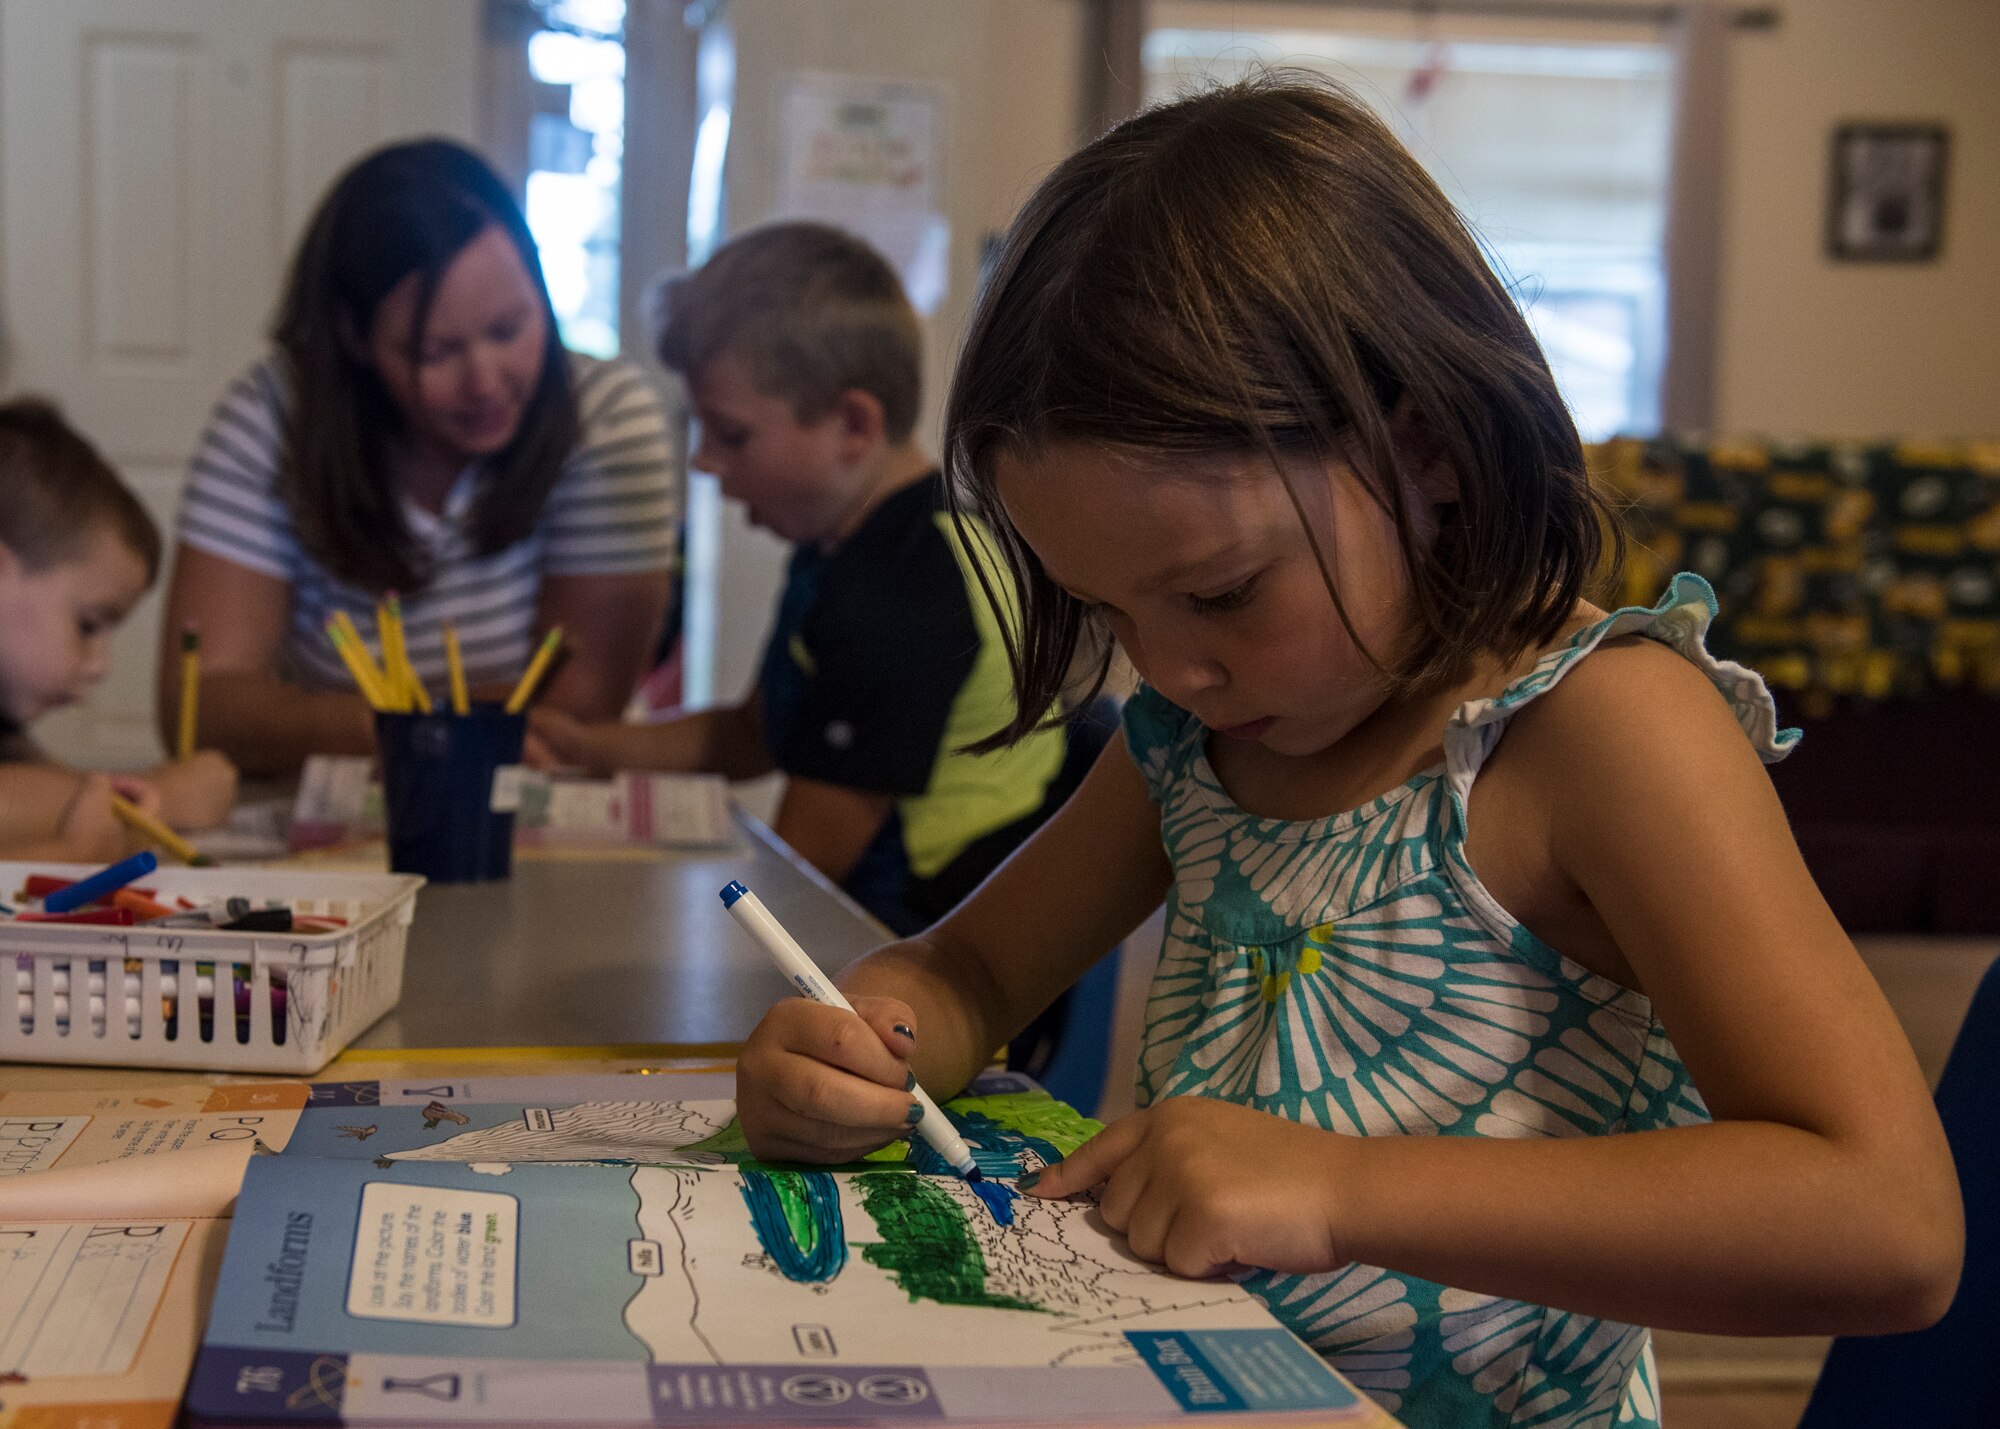 Team Fairchild families use the Family Child Care program to care for their children during the duty day at Fairchild Air Force Base, Washington, Aug. 16, 2018. FCC providers offer children a consistent and personal learning space in an in-home environment. (U.S. Air Force photo/Airman 1st Class Whitney Laine)